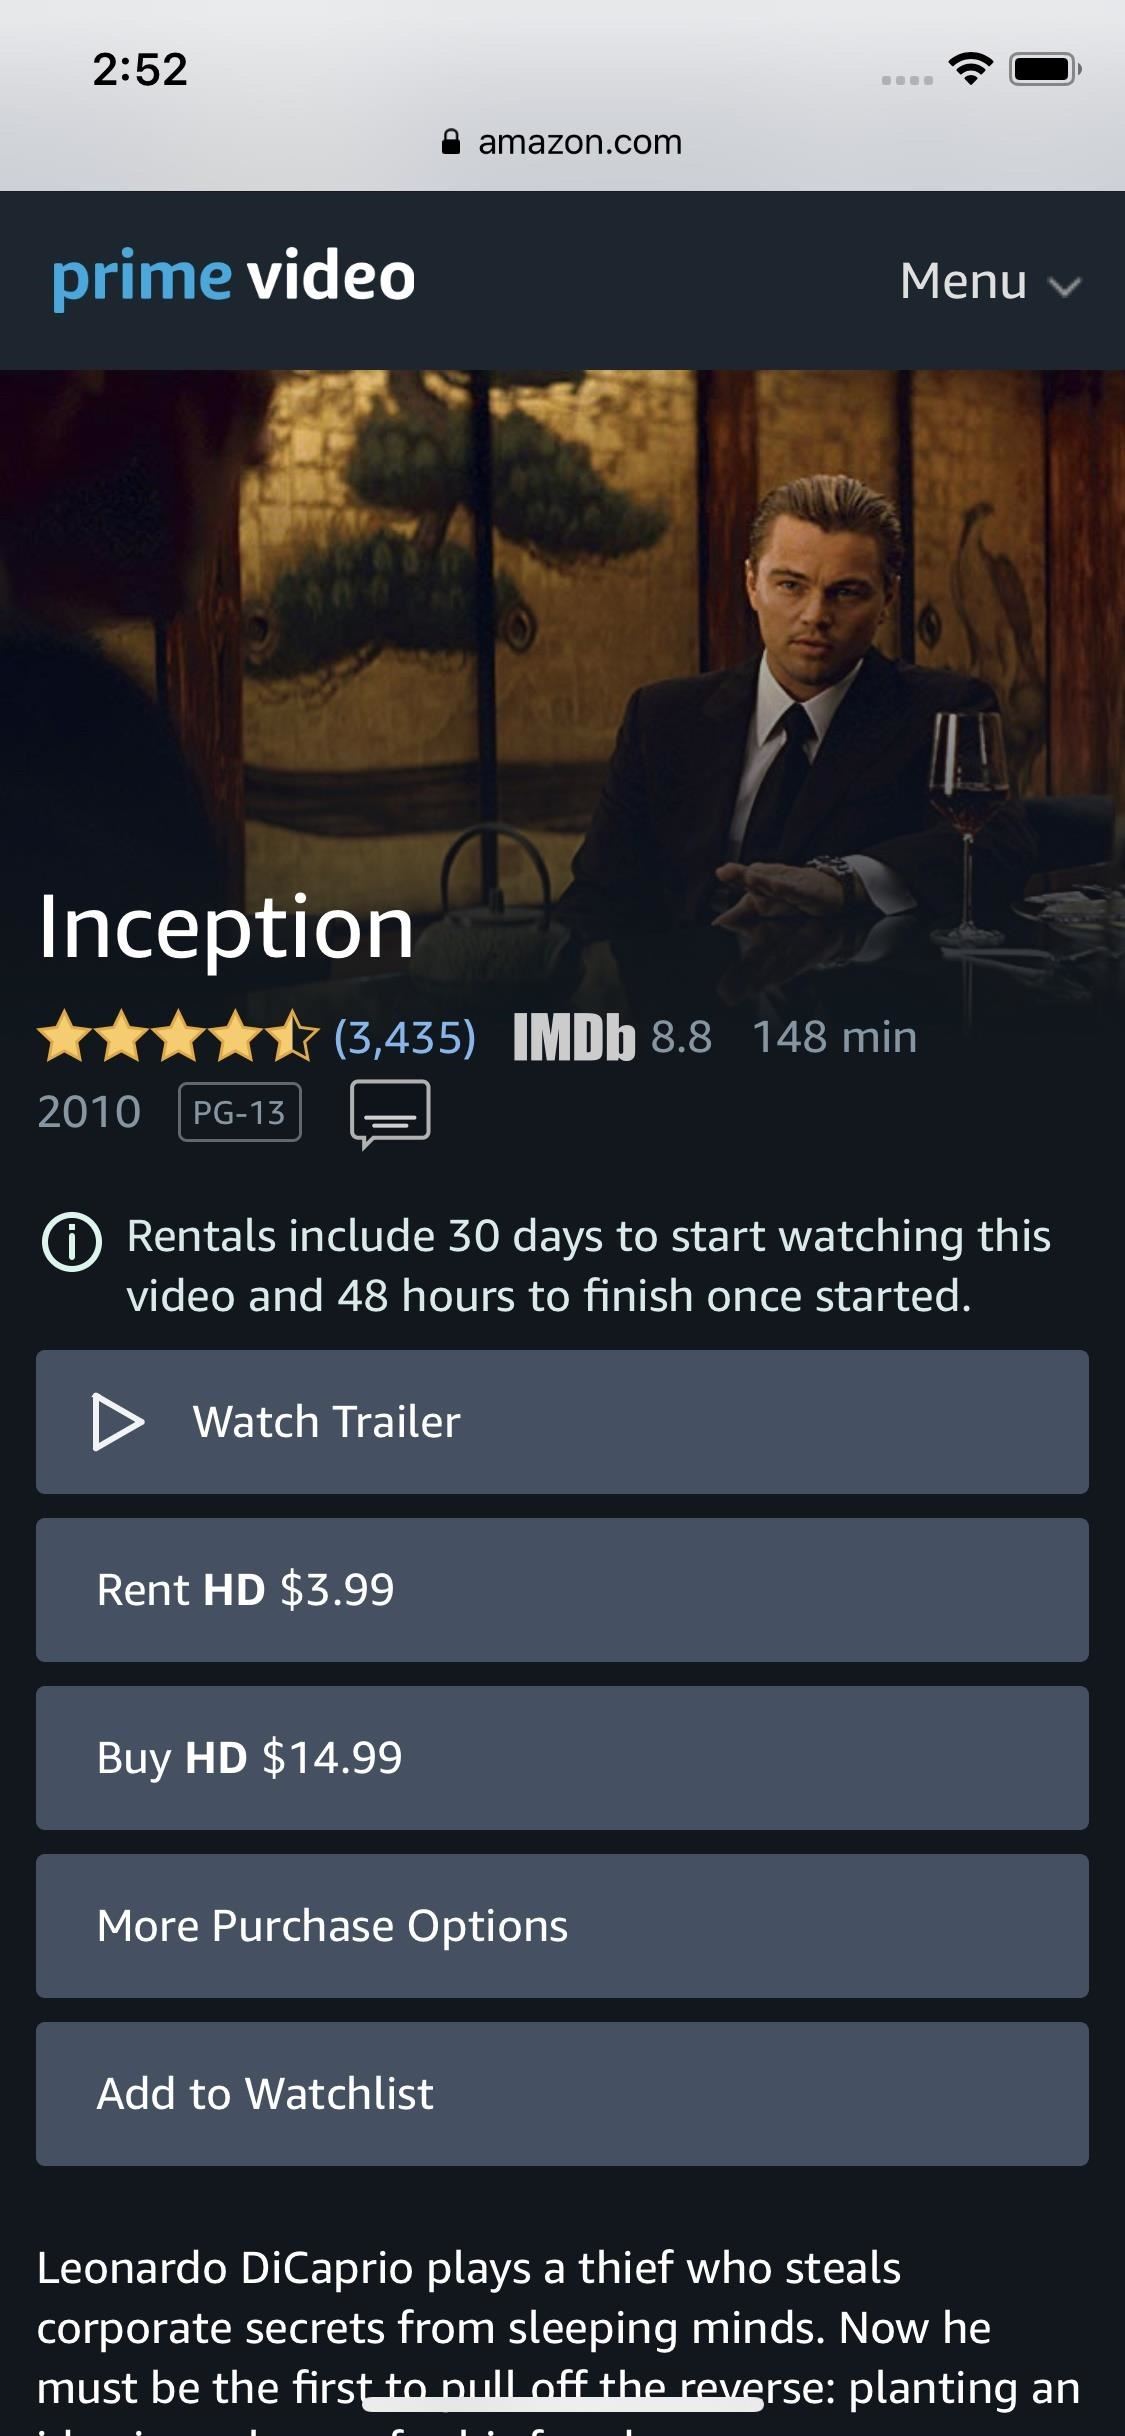 How to Buy Movies & TV Shows from Amazon Prime Video on Your iPhone